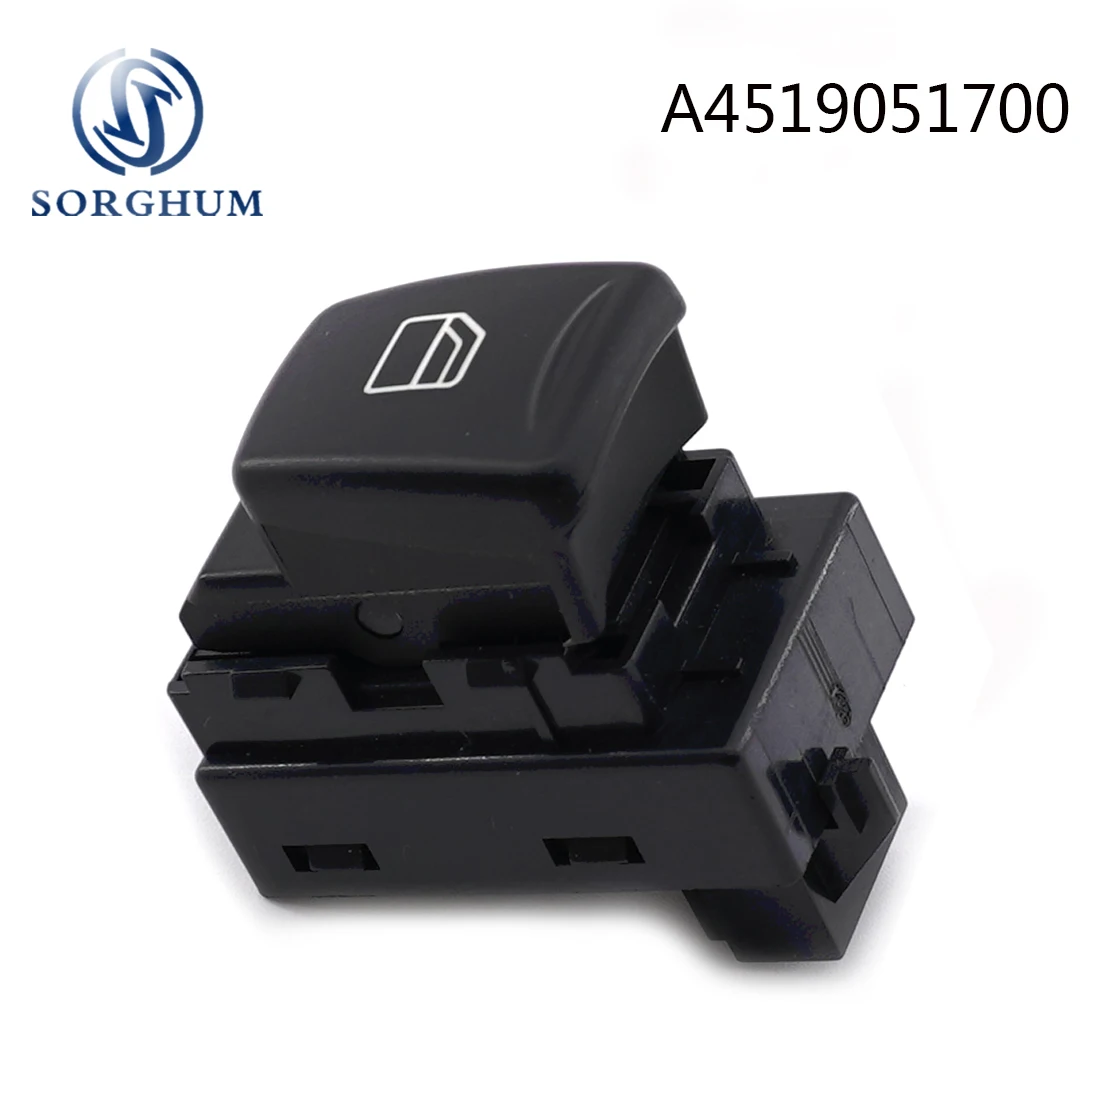 

SORGHUM Electric Power Window Lifter Control Switch Button For Smart 451 For two Cabrio 2007-2019 A4519051700